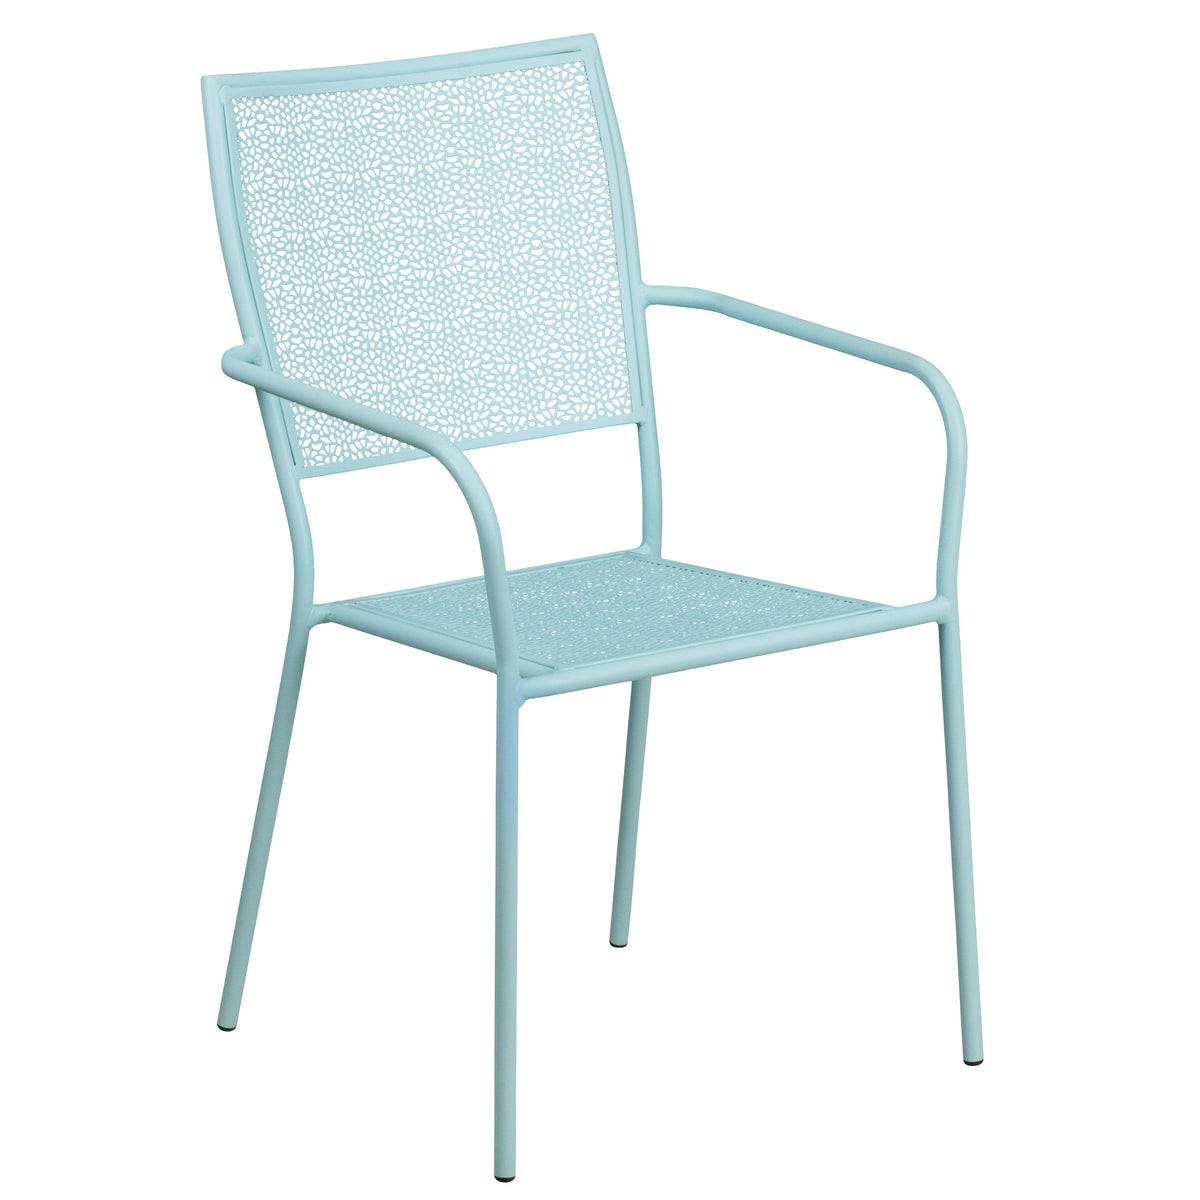 Sky Blue |#| 35.5inch SQ Sky Blue Indoor-Outdoor Steel Patio Table Set w/ 2 Square Back Chairs